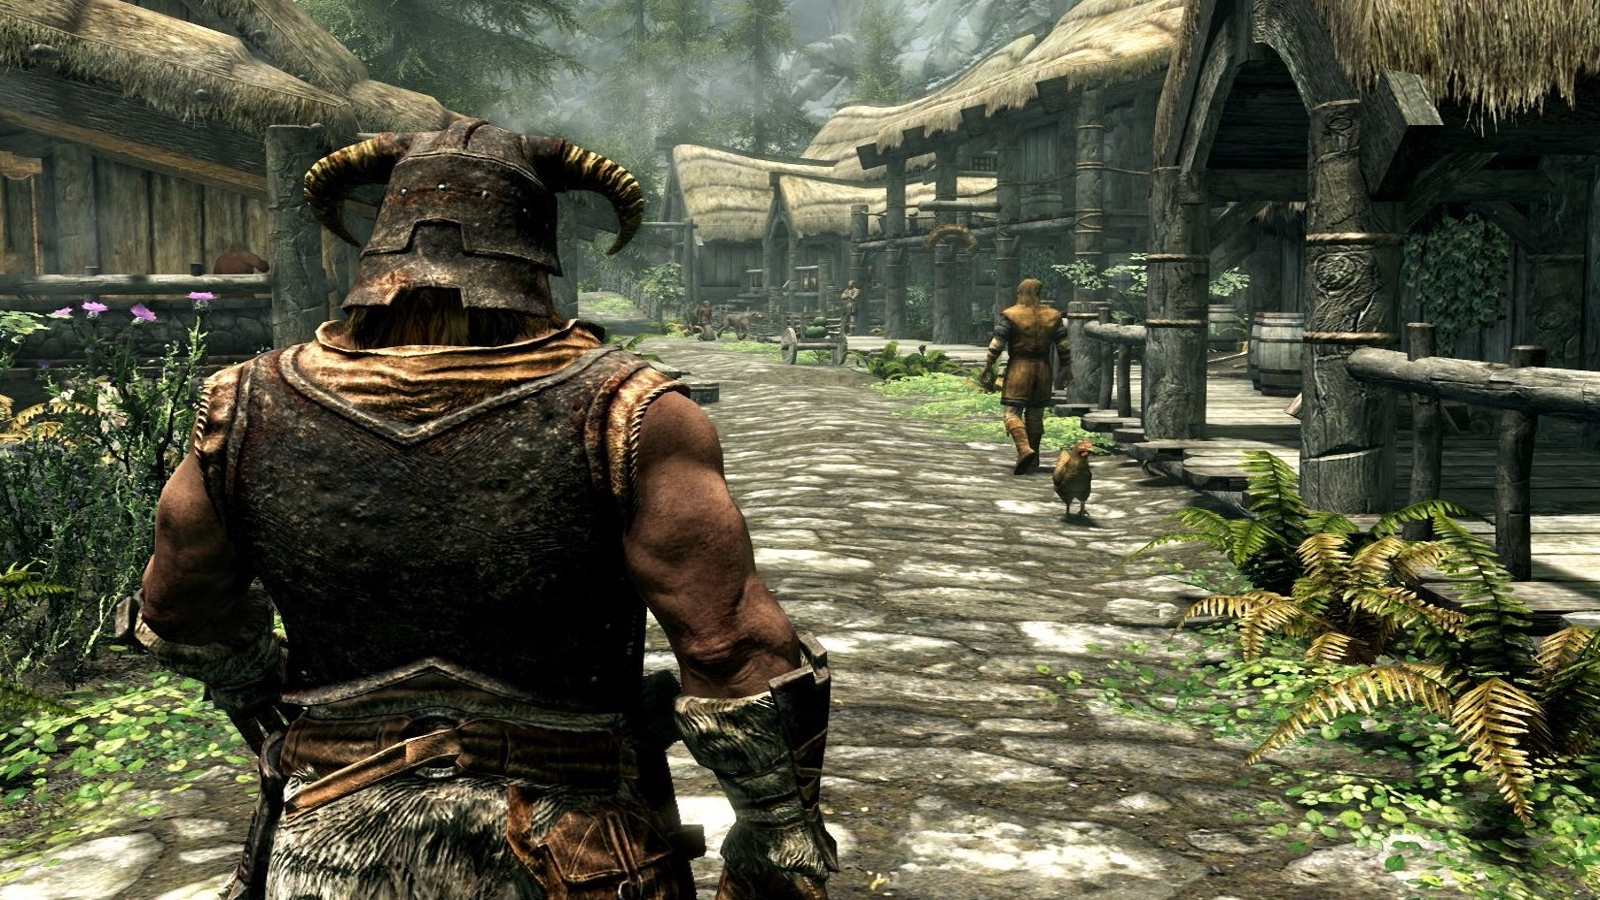 Skyrim mods space is 1GB on PS4, but 5GB on Xbox One